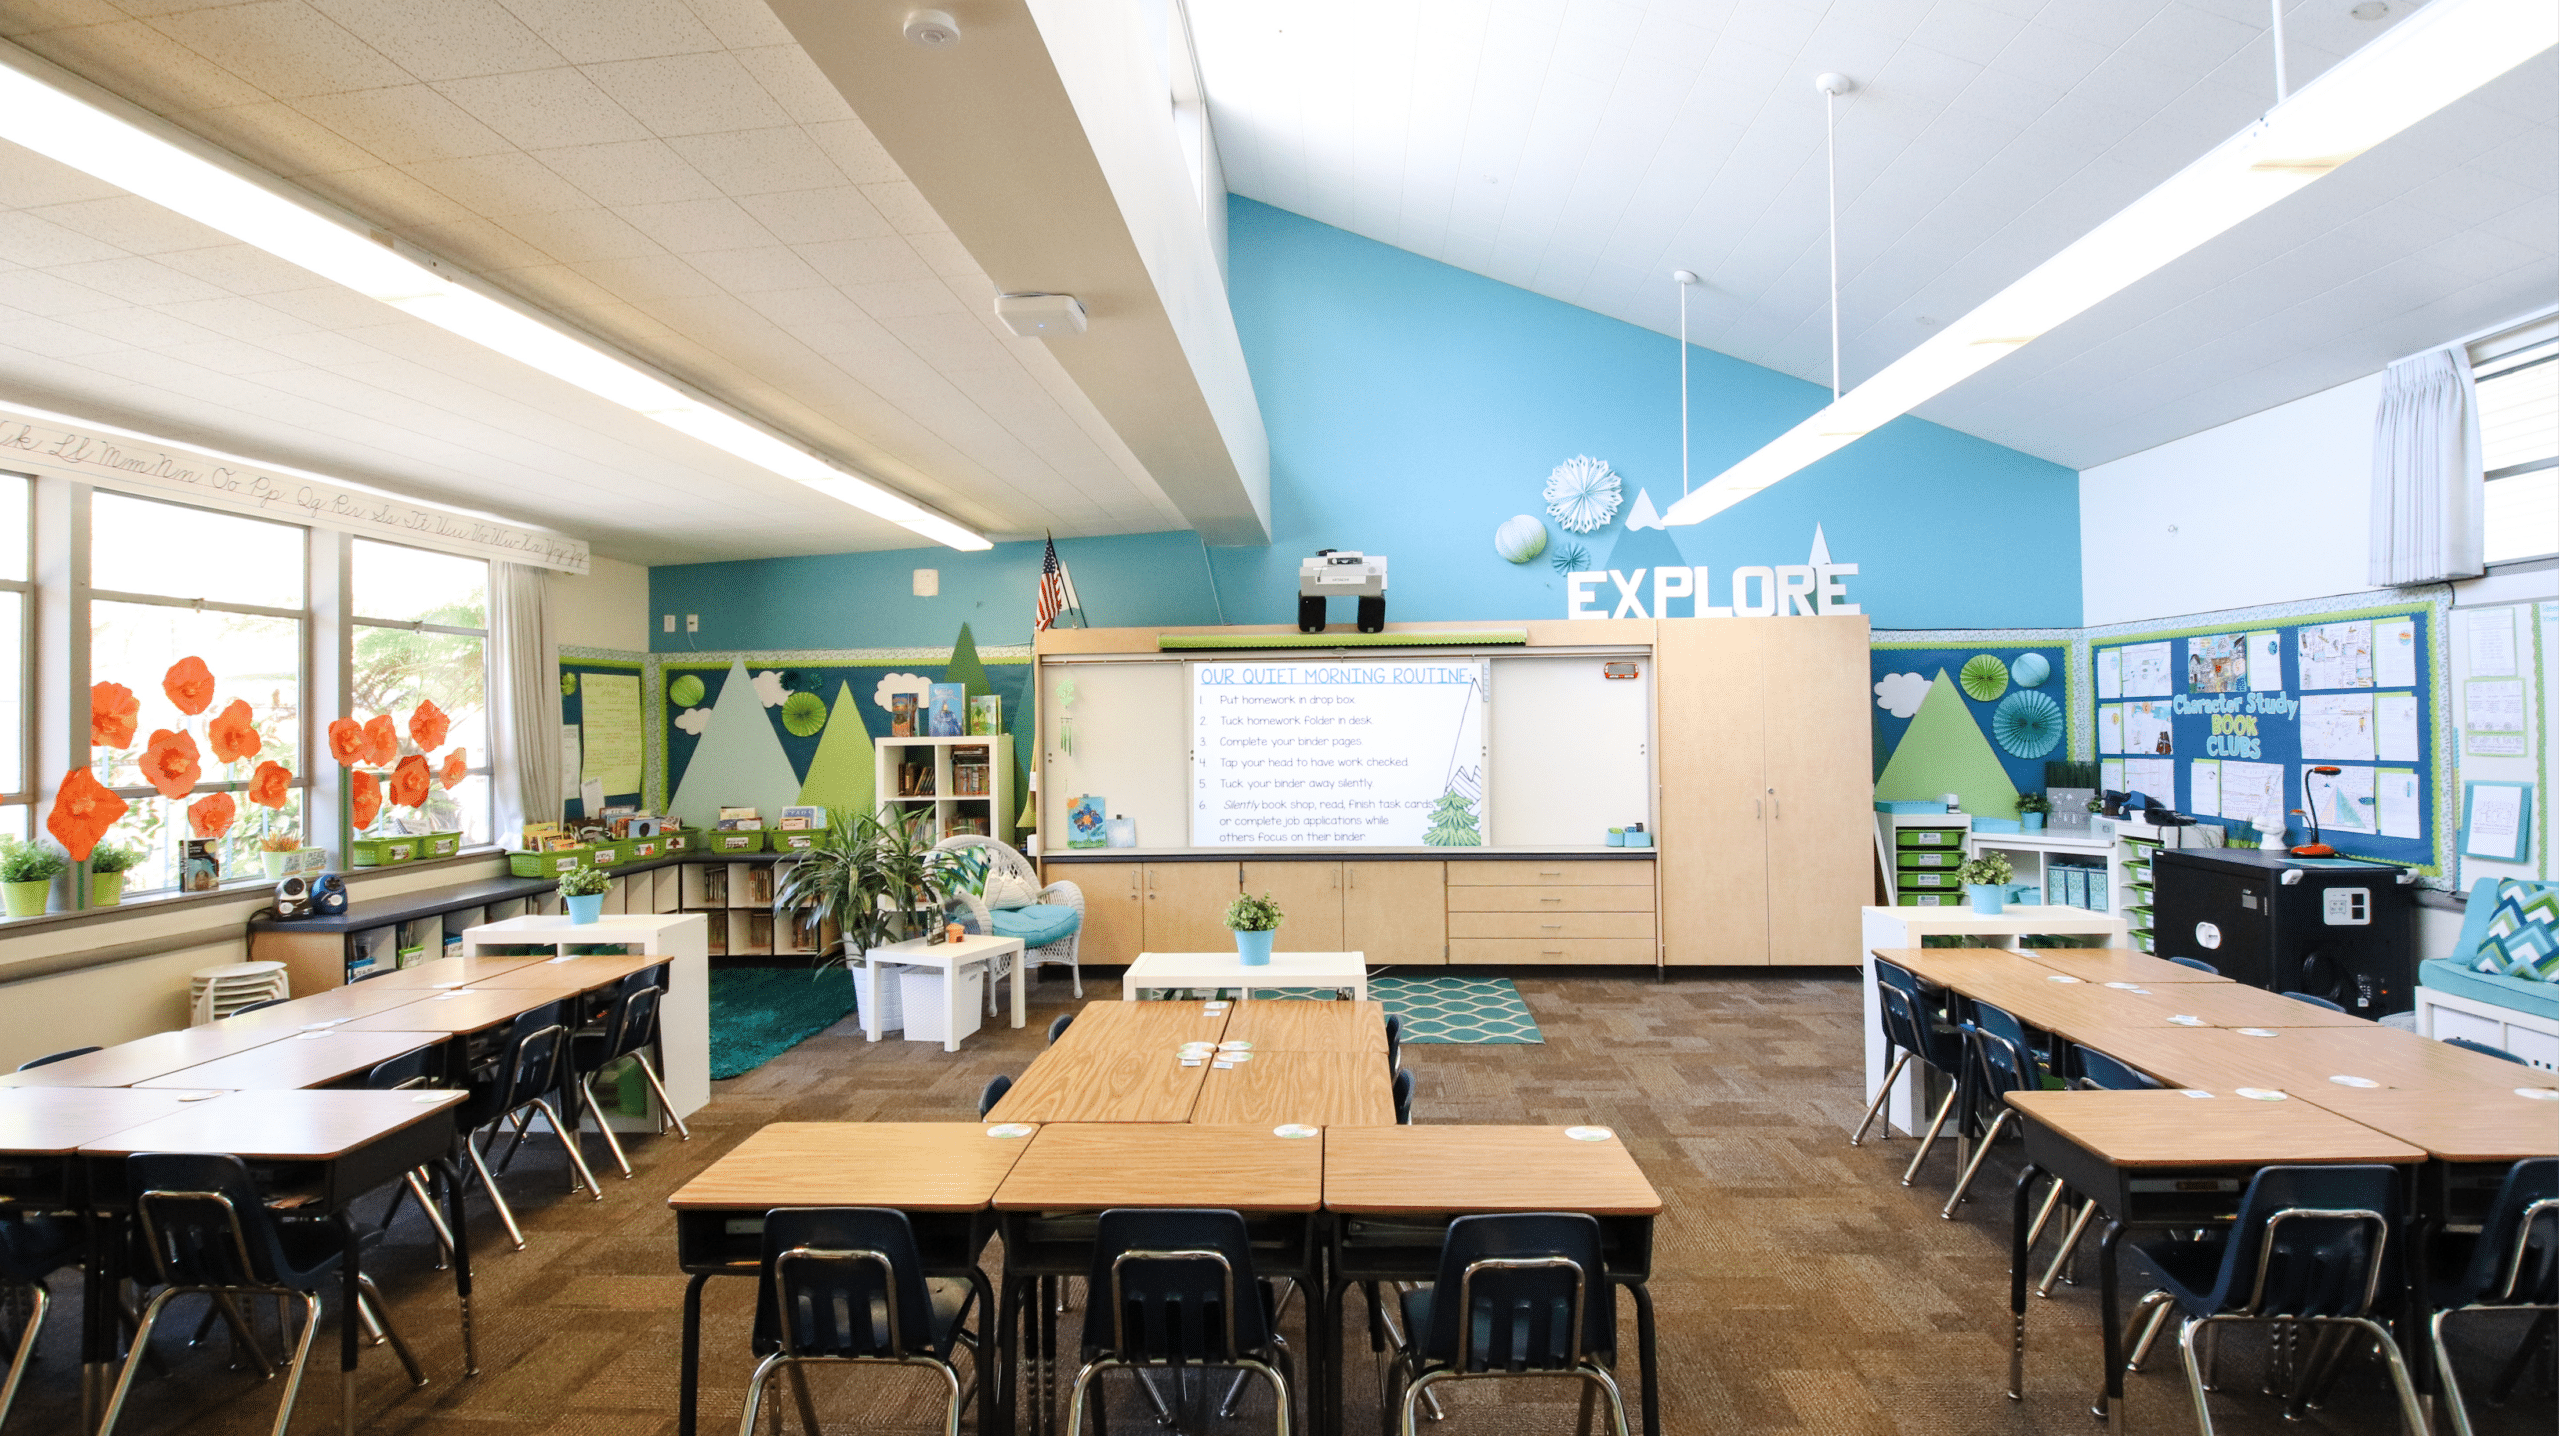 Core Inspiration's third-grade classroom before the daily morning routine begins in the classroom. All desks are empty, waiting for students to arrive and the quiet morning routine slide is displayed at the front of the room. 